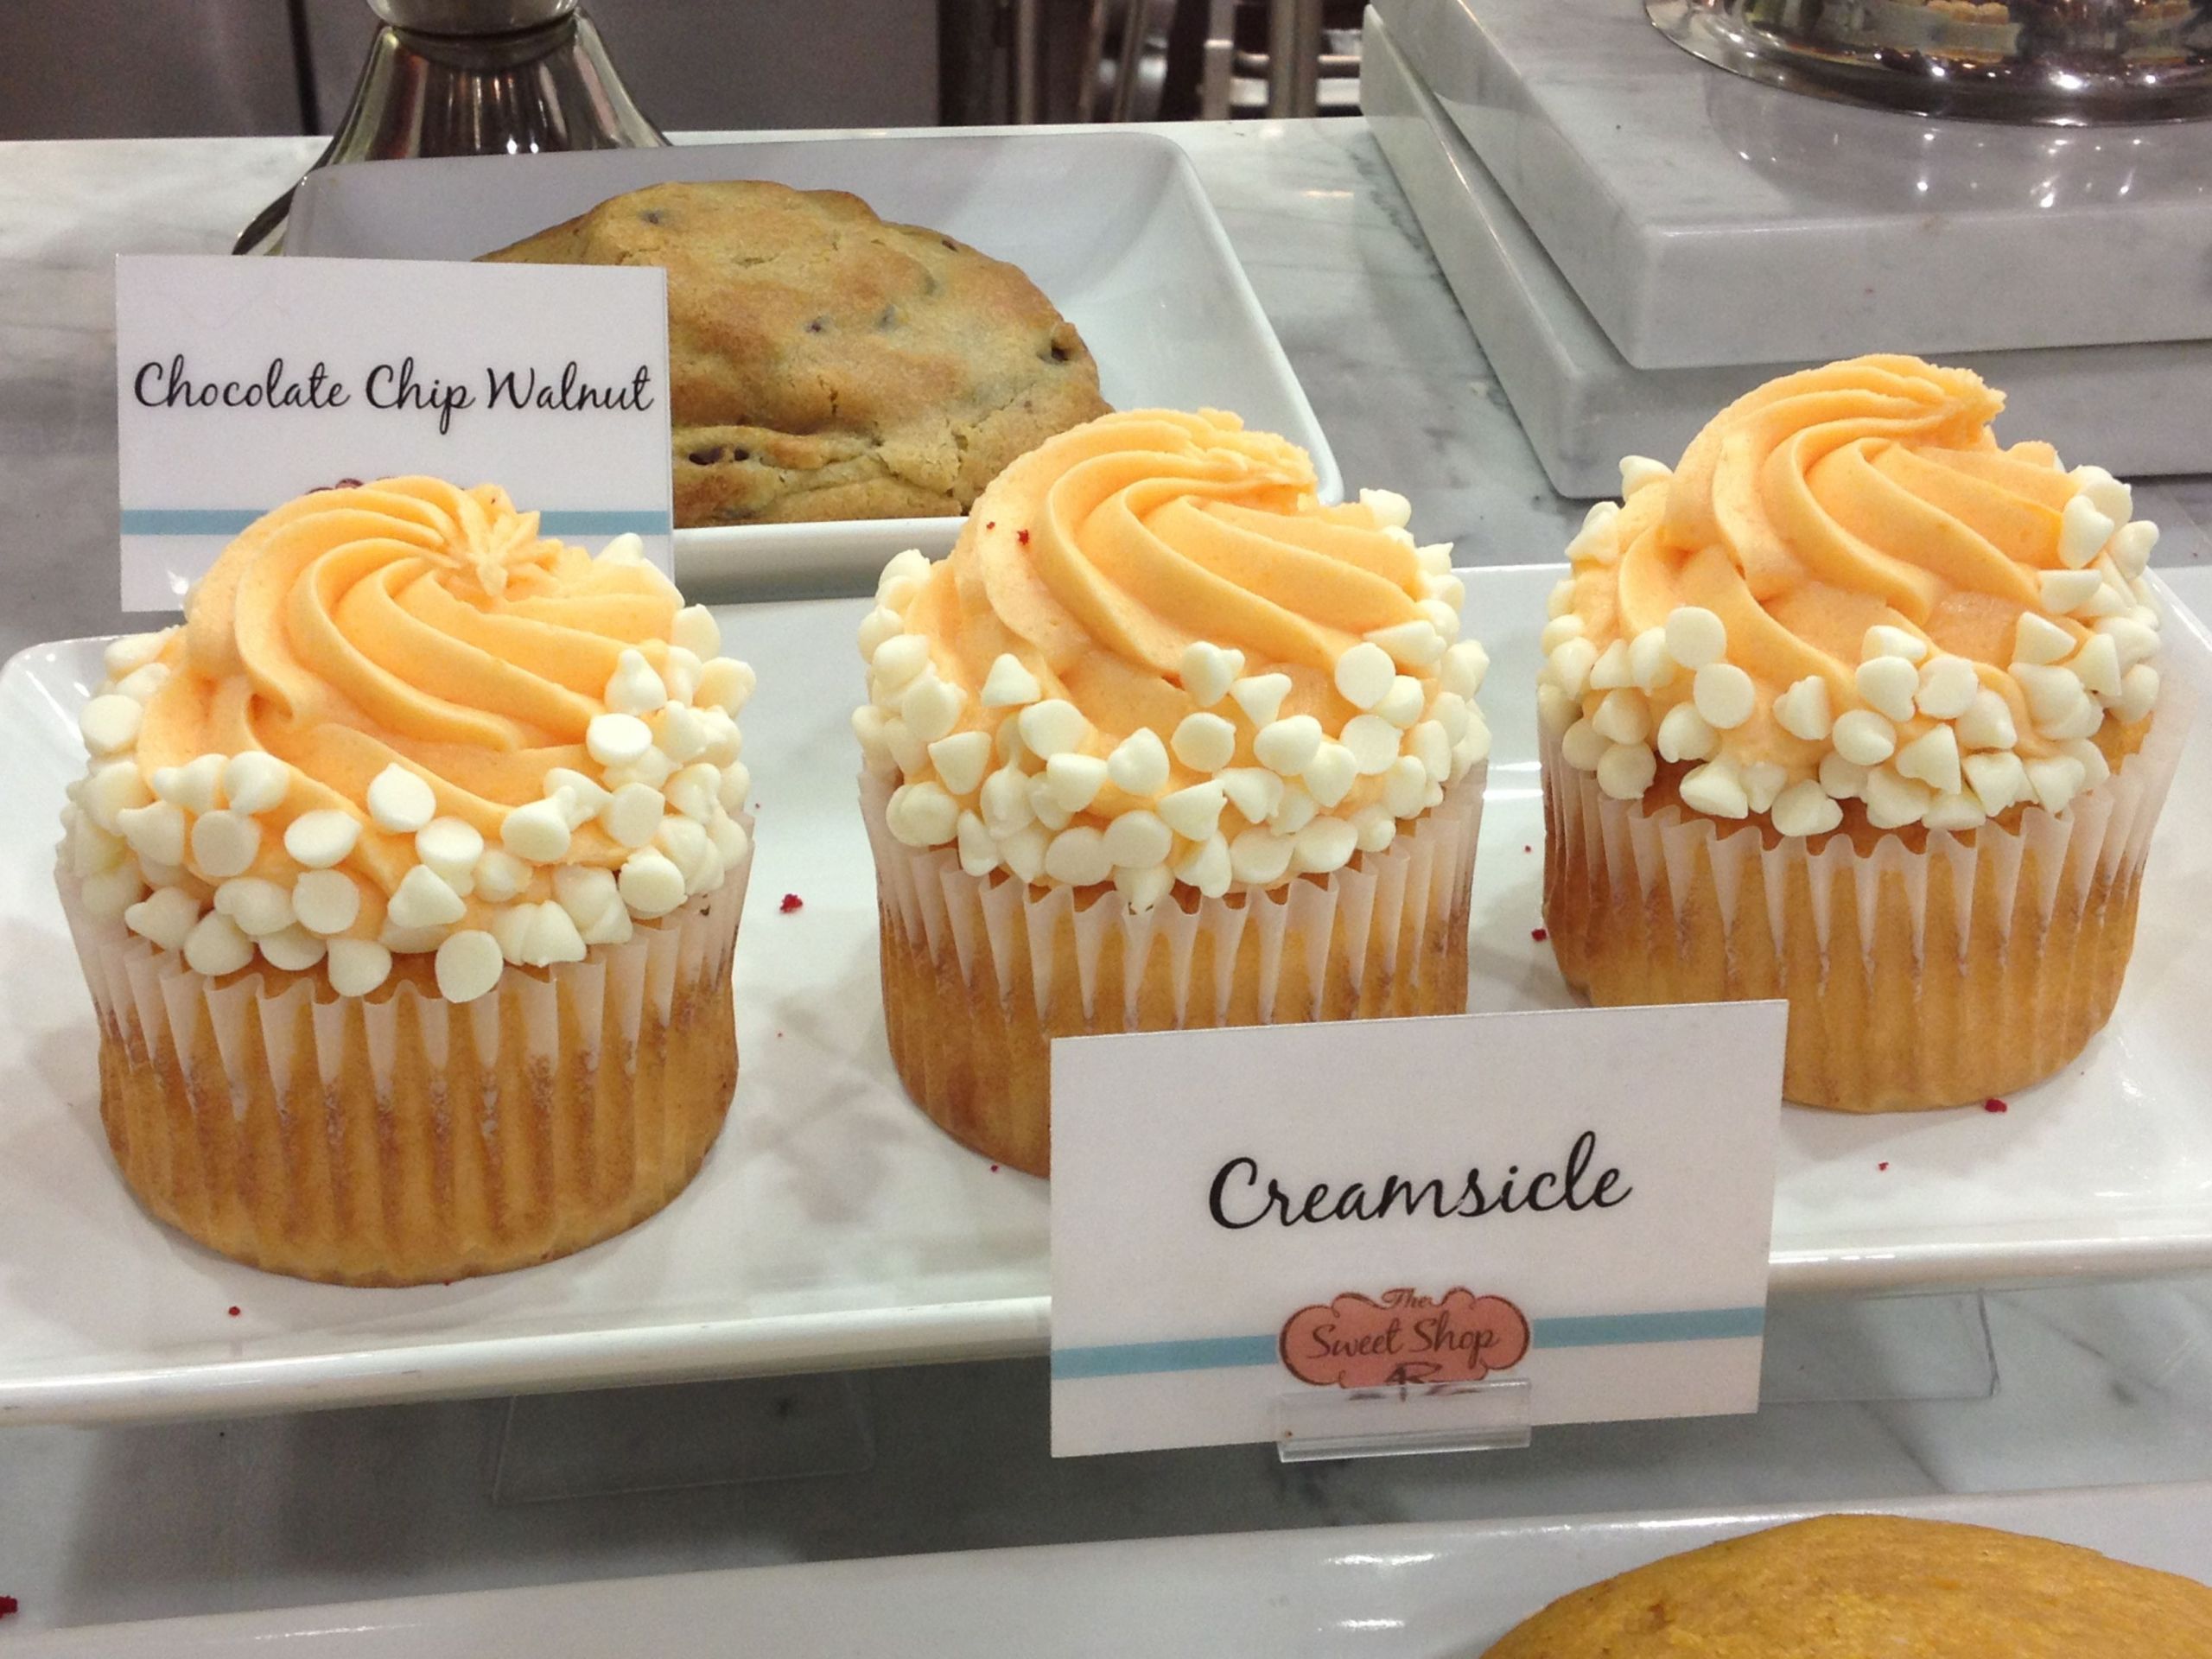 Cupcakes Winter Park
 Creamsicle Cupcakes from 4 Rivers Smokehouse in Winter